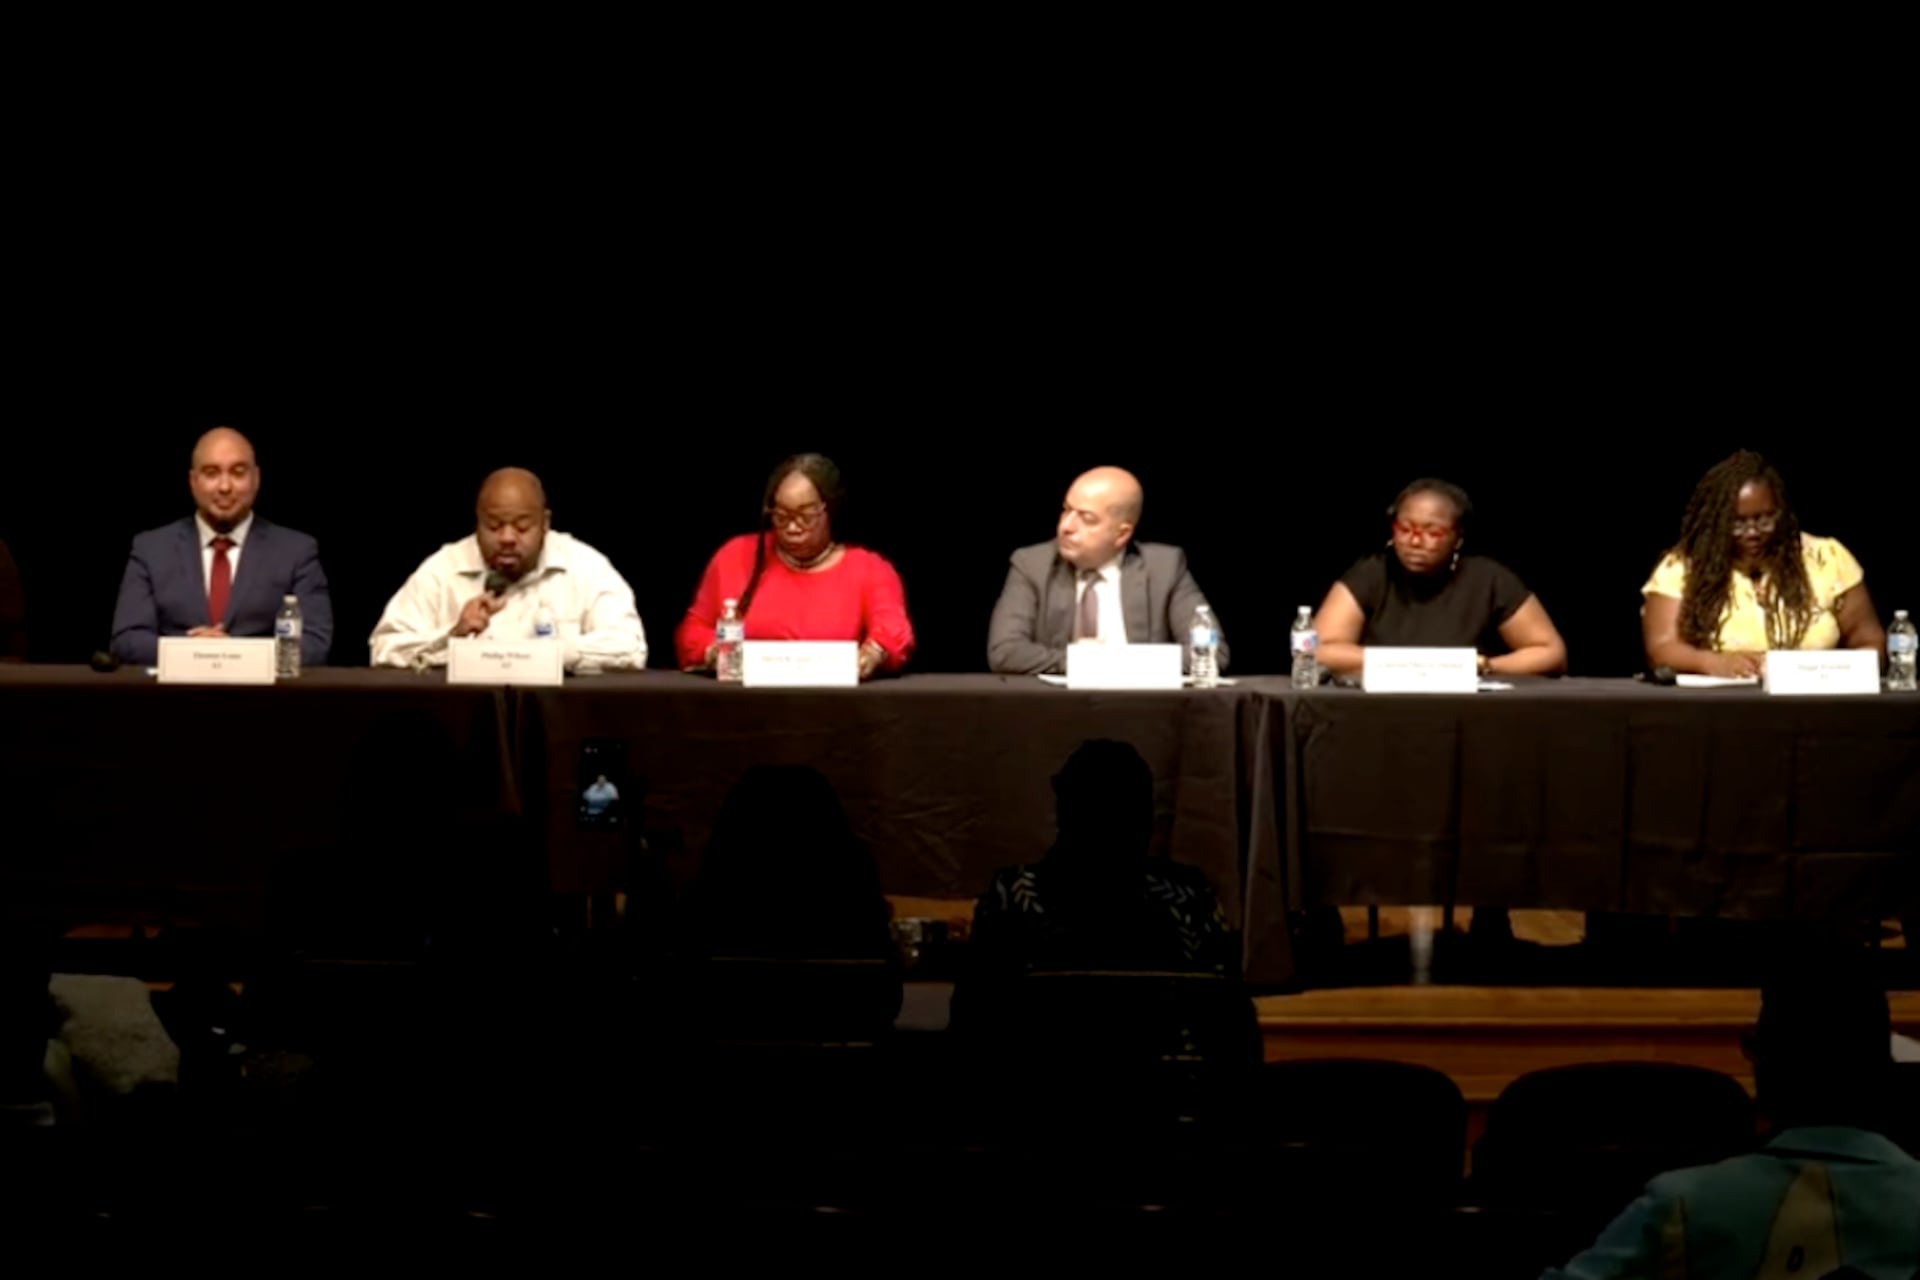 From left, Crystal Williams, Thomas Luna, Phillip Wilson, Allison K. James-Frison, Daniel Gonzalez, A’Dorian Murray-Thomas, and Maggie Freeman sit at a table on stage with a black background.